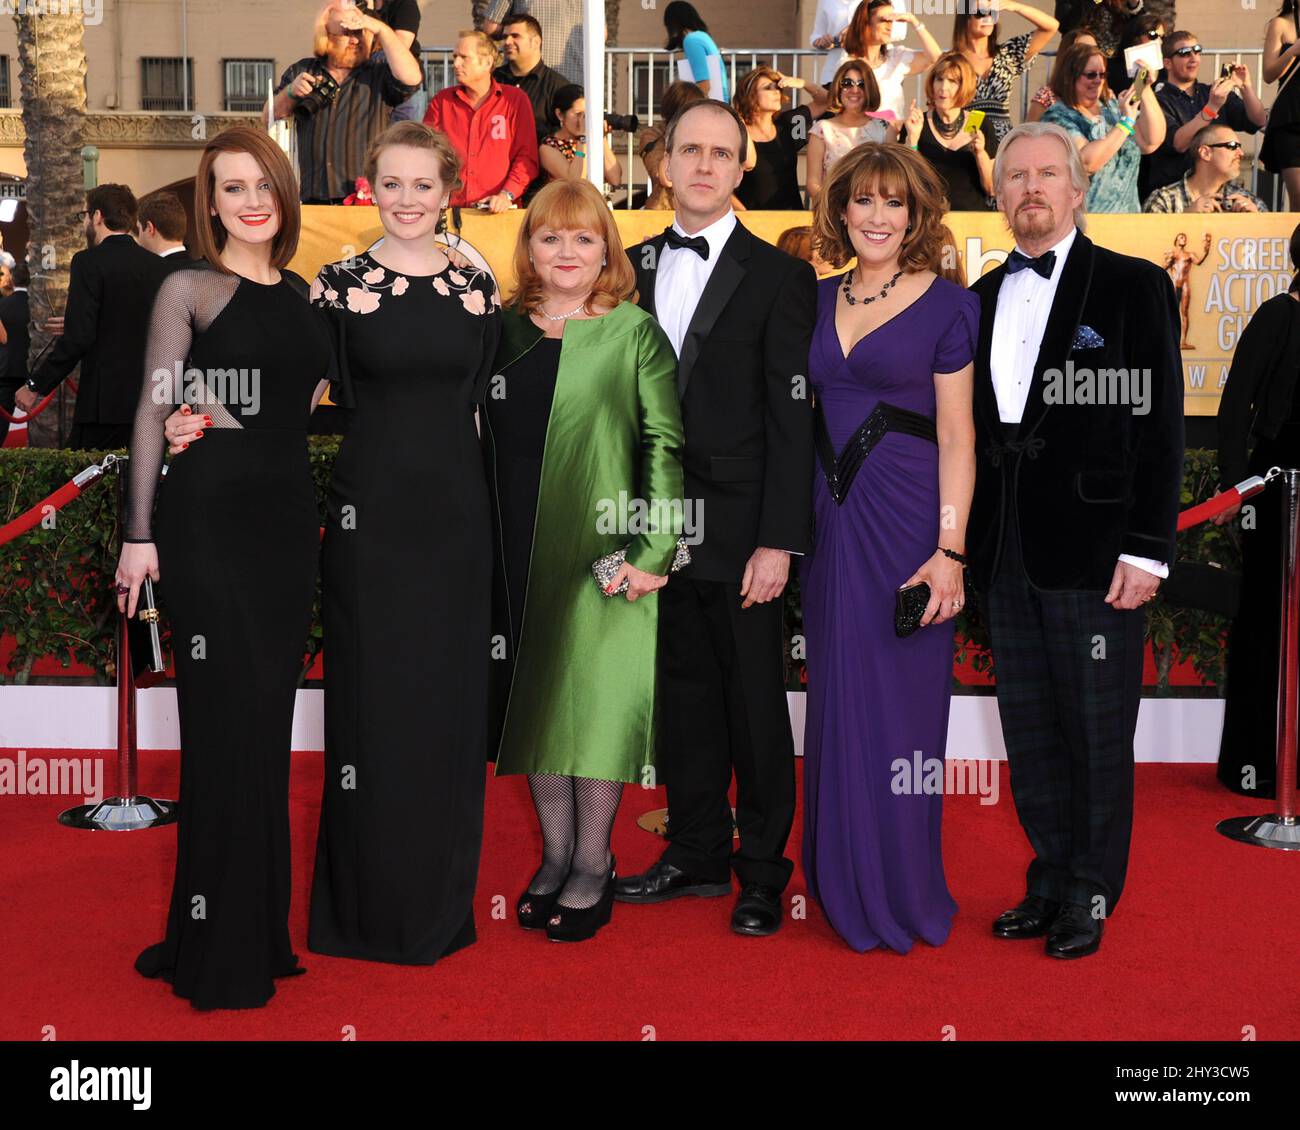 Sophie McShera, Cara Theobold, Lesley Nicol, Kevin Doyle, Phyllis Logan and David Robb attending the 20th Annual Screen Actors Guild Awards held at the Shrine Auditorium in Los Angeles, California. Stock Photo